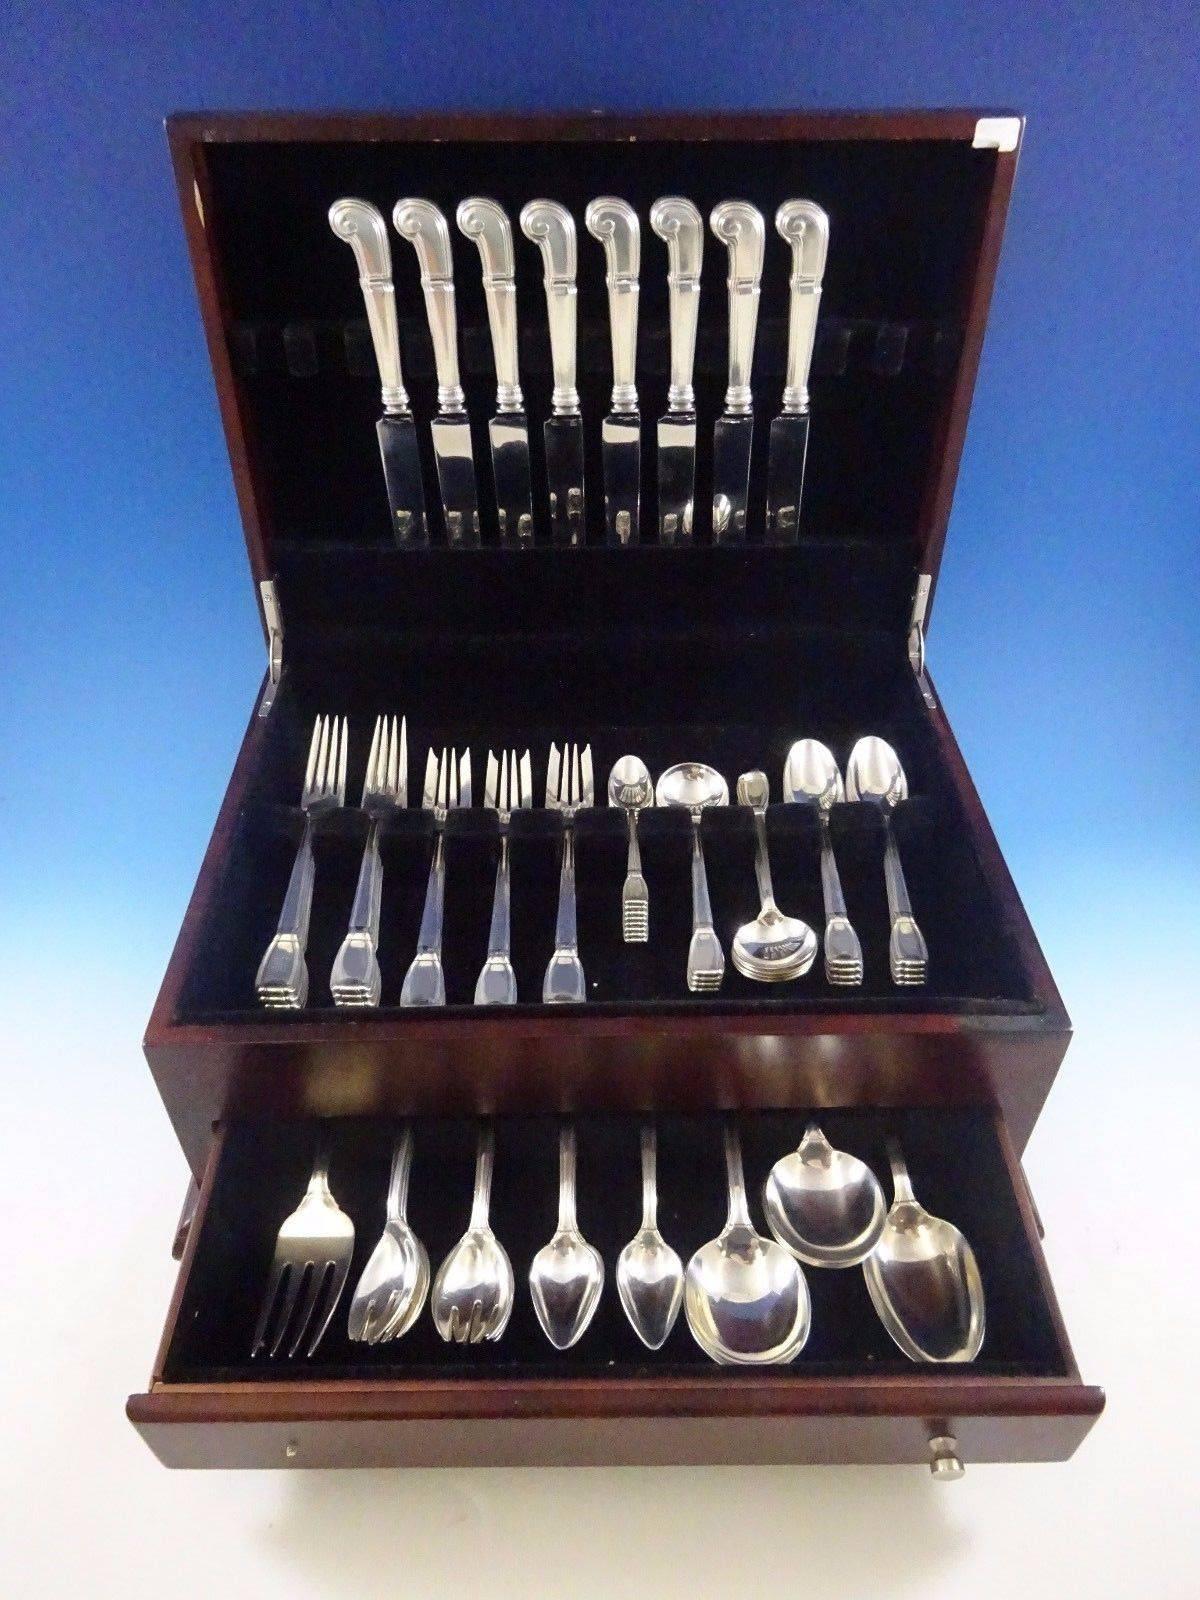 Castilian by Tiffany and Co. Sterling Silver Flatware set - 74 pieces. This set includes: 8 Luncheon Knives, 9 1/4